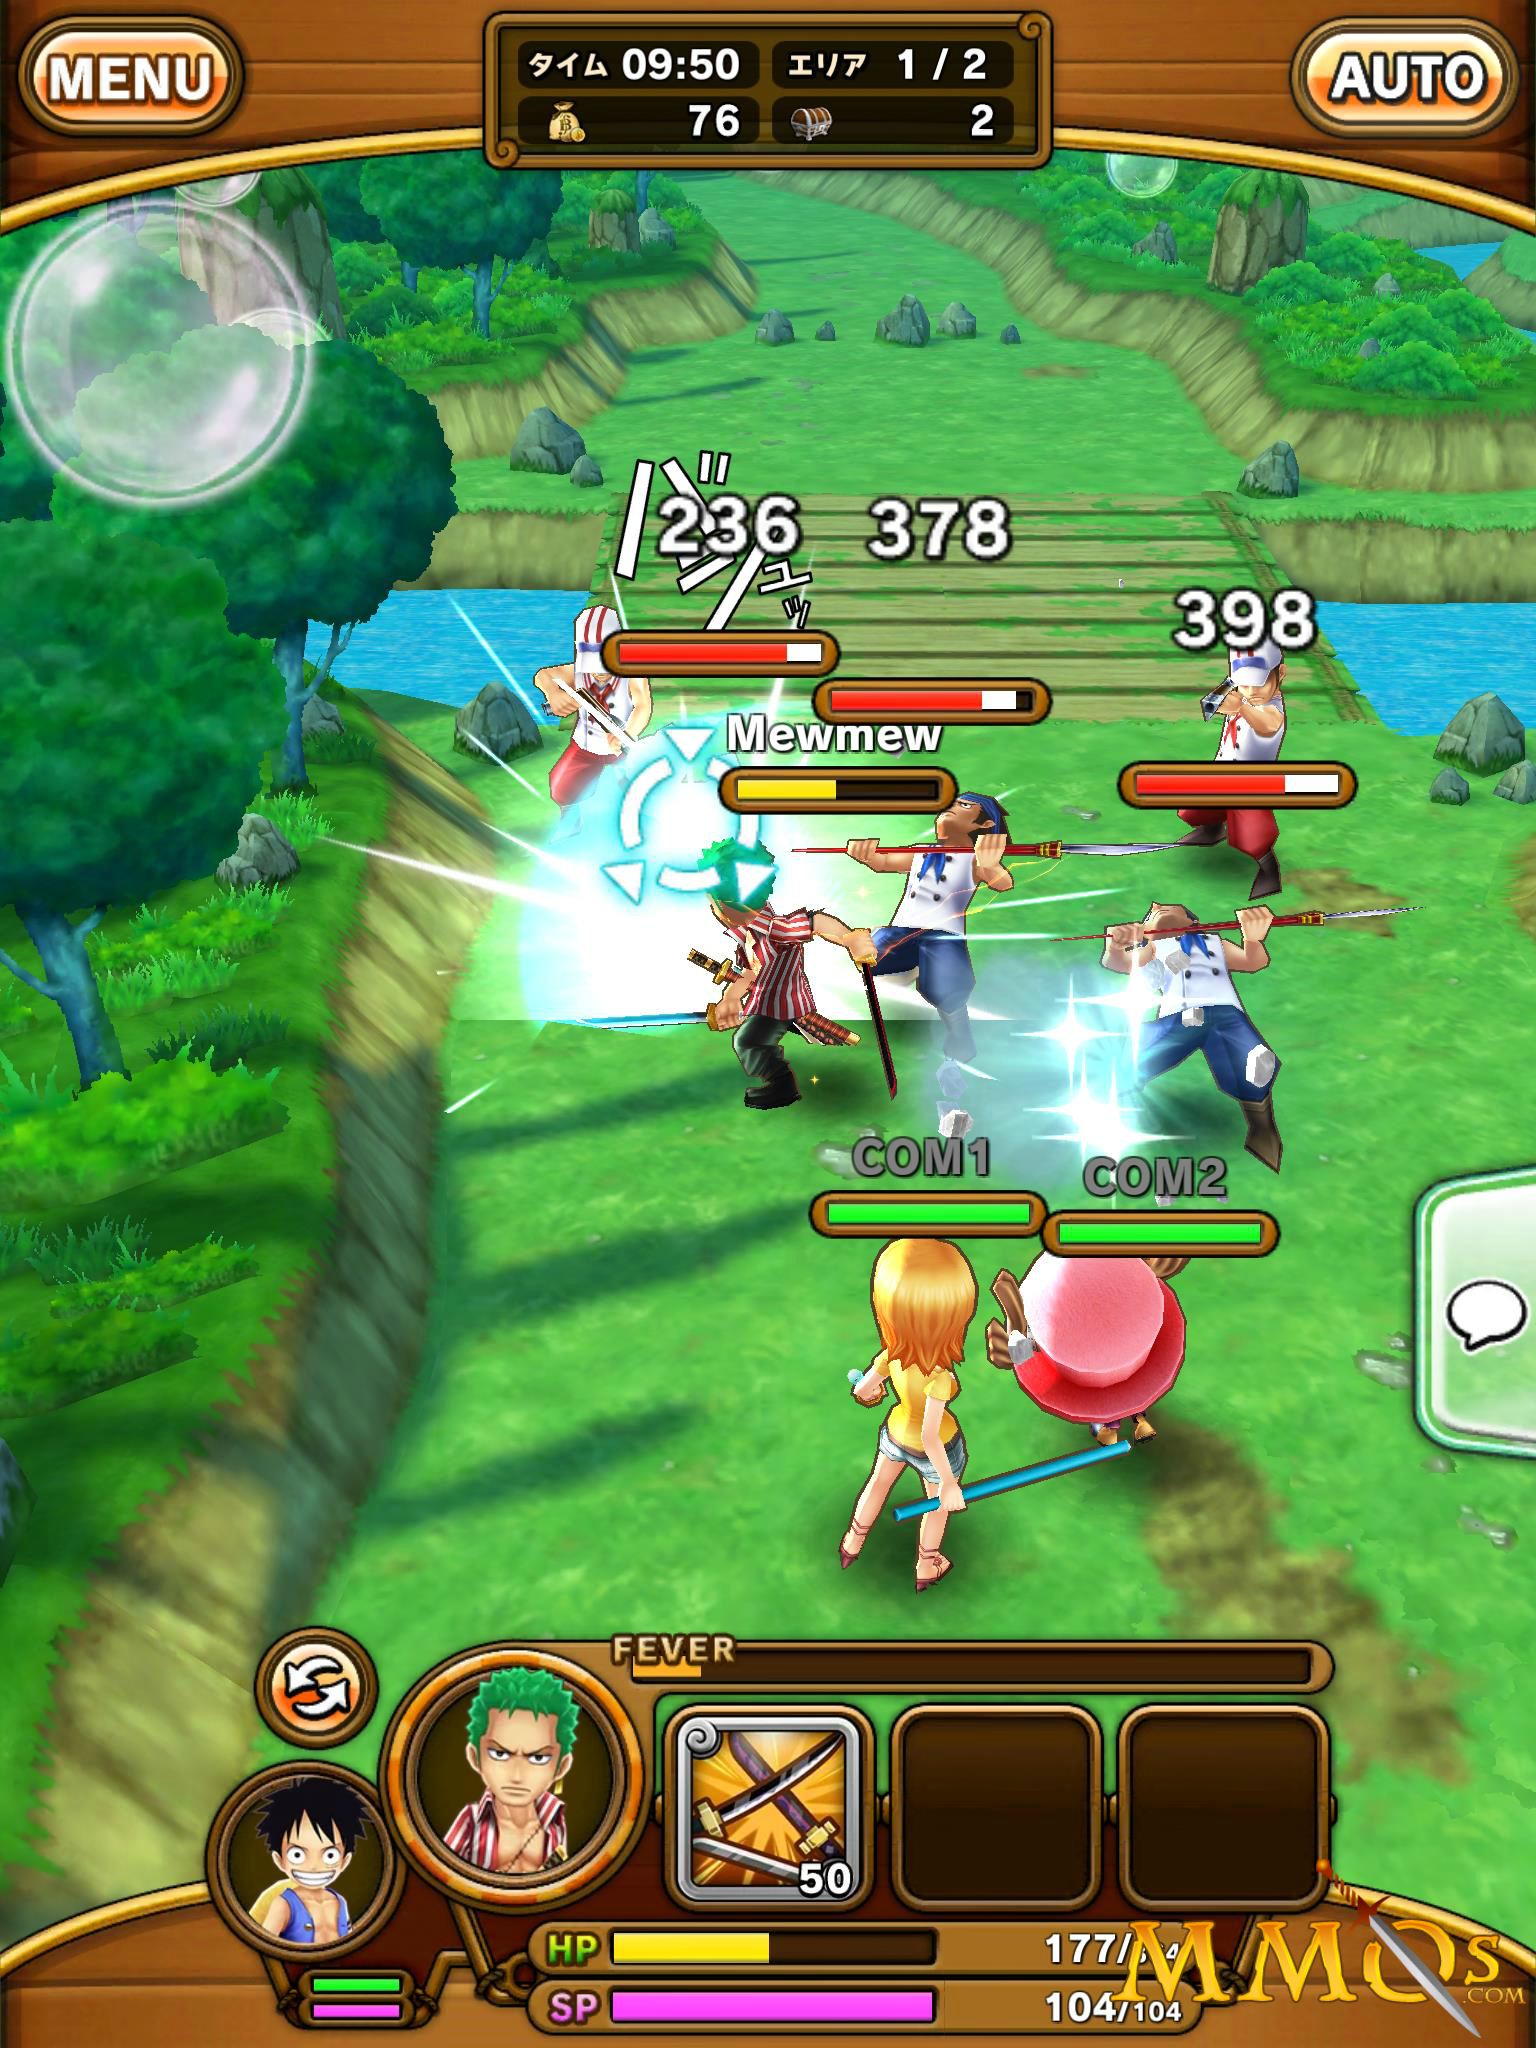 Bandai Namco's ONE PIECE Thousand Storm game now available via